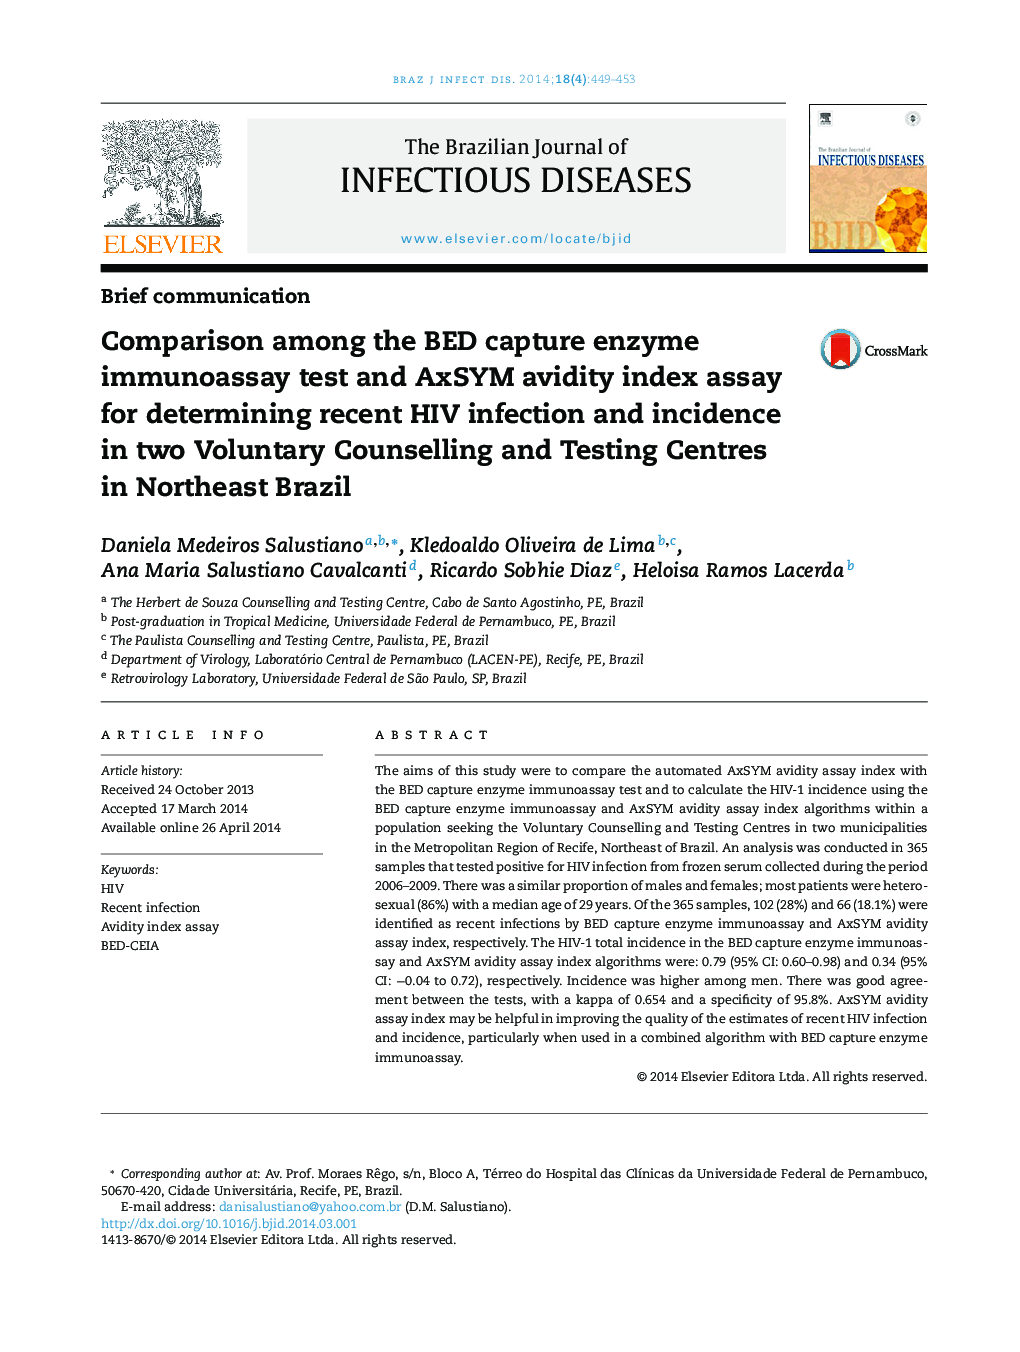 Comparison among the BED capture enzyme immunoassay test and AxSYM avidity index assay for determining recent HIV infection and incidence in two Voluntary Counselling and Testing Centres in Northeast Brazil